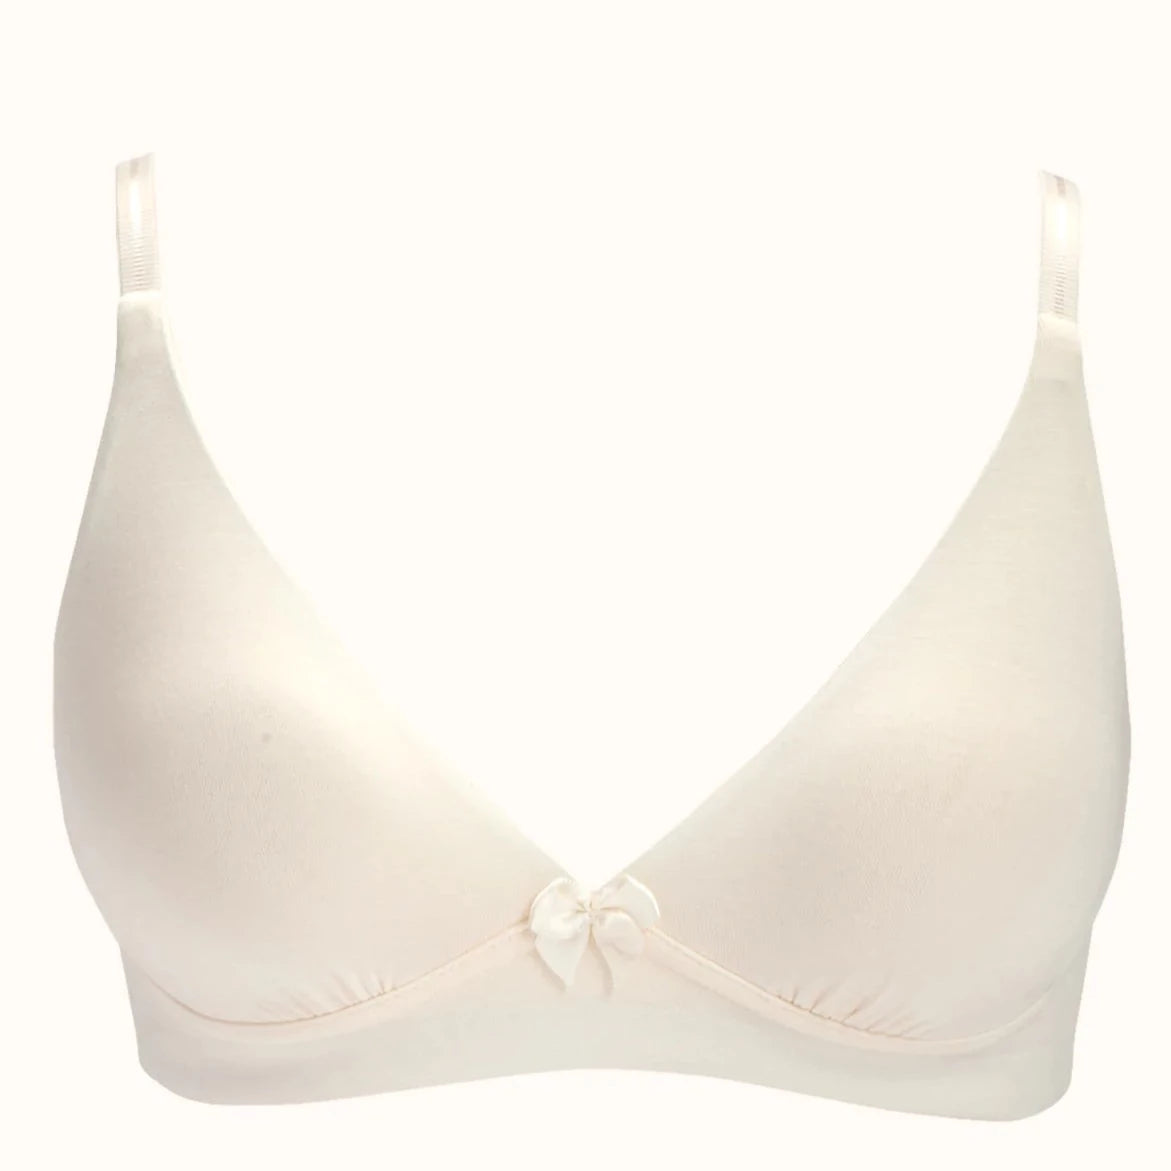 Molly Pocketed Plunge Bra |  AnaOno | Post-surgery bras made just for those affected by breast cancer and breast surgery.